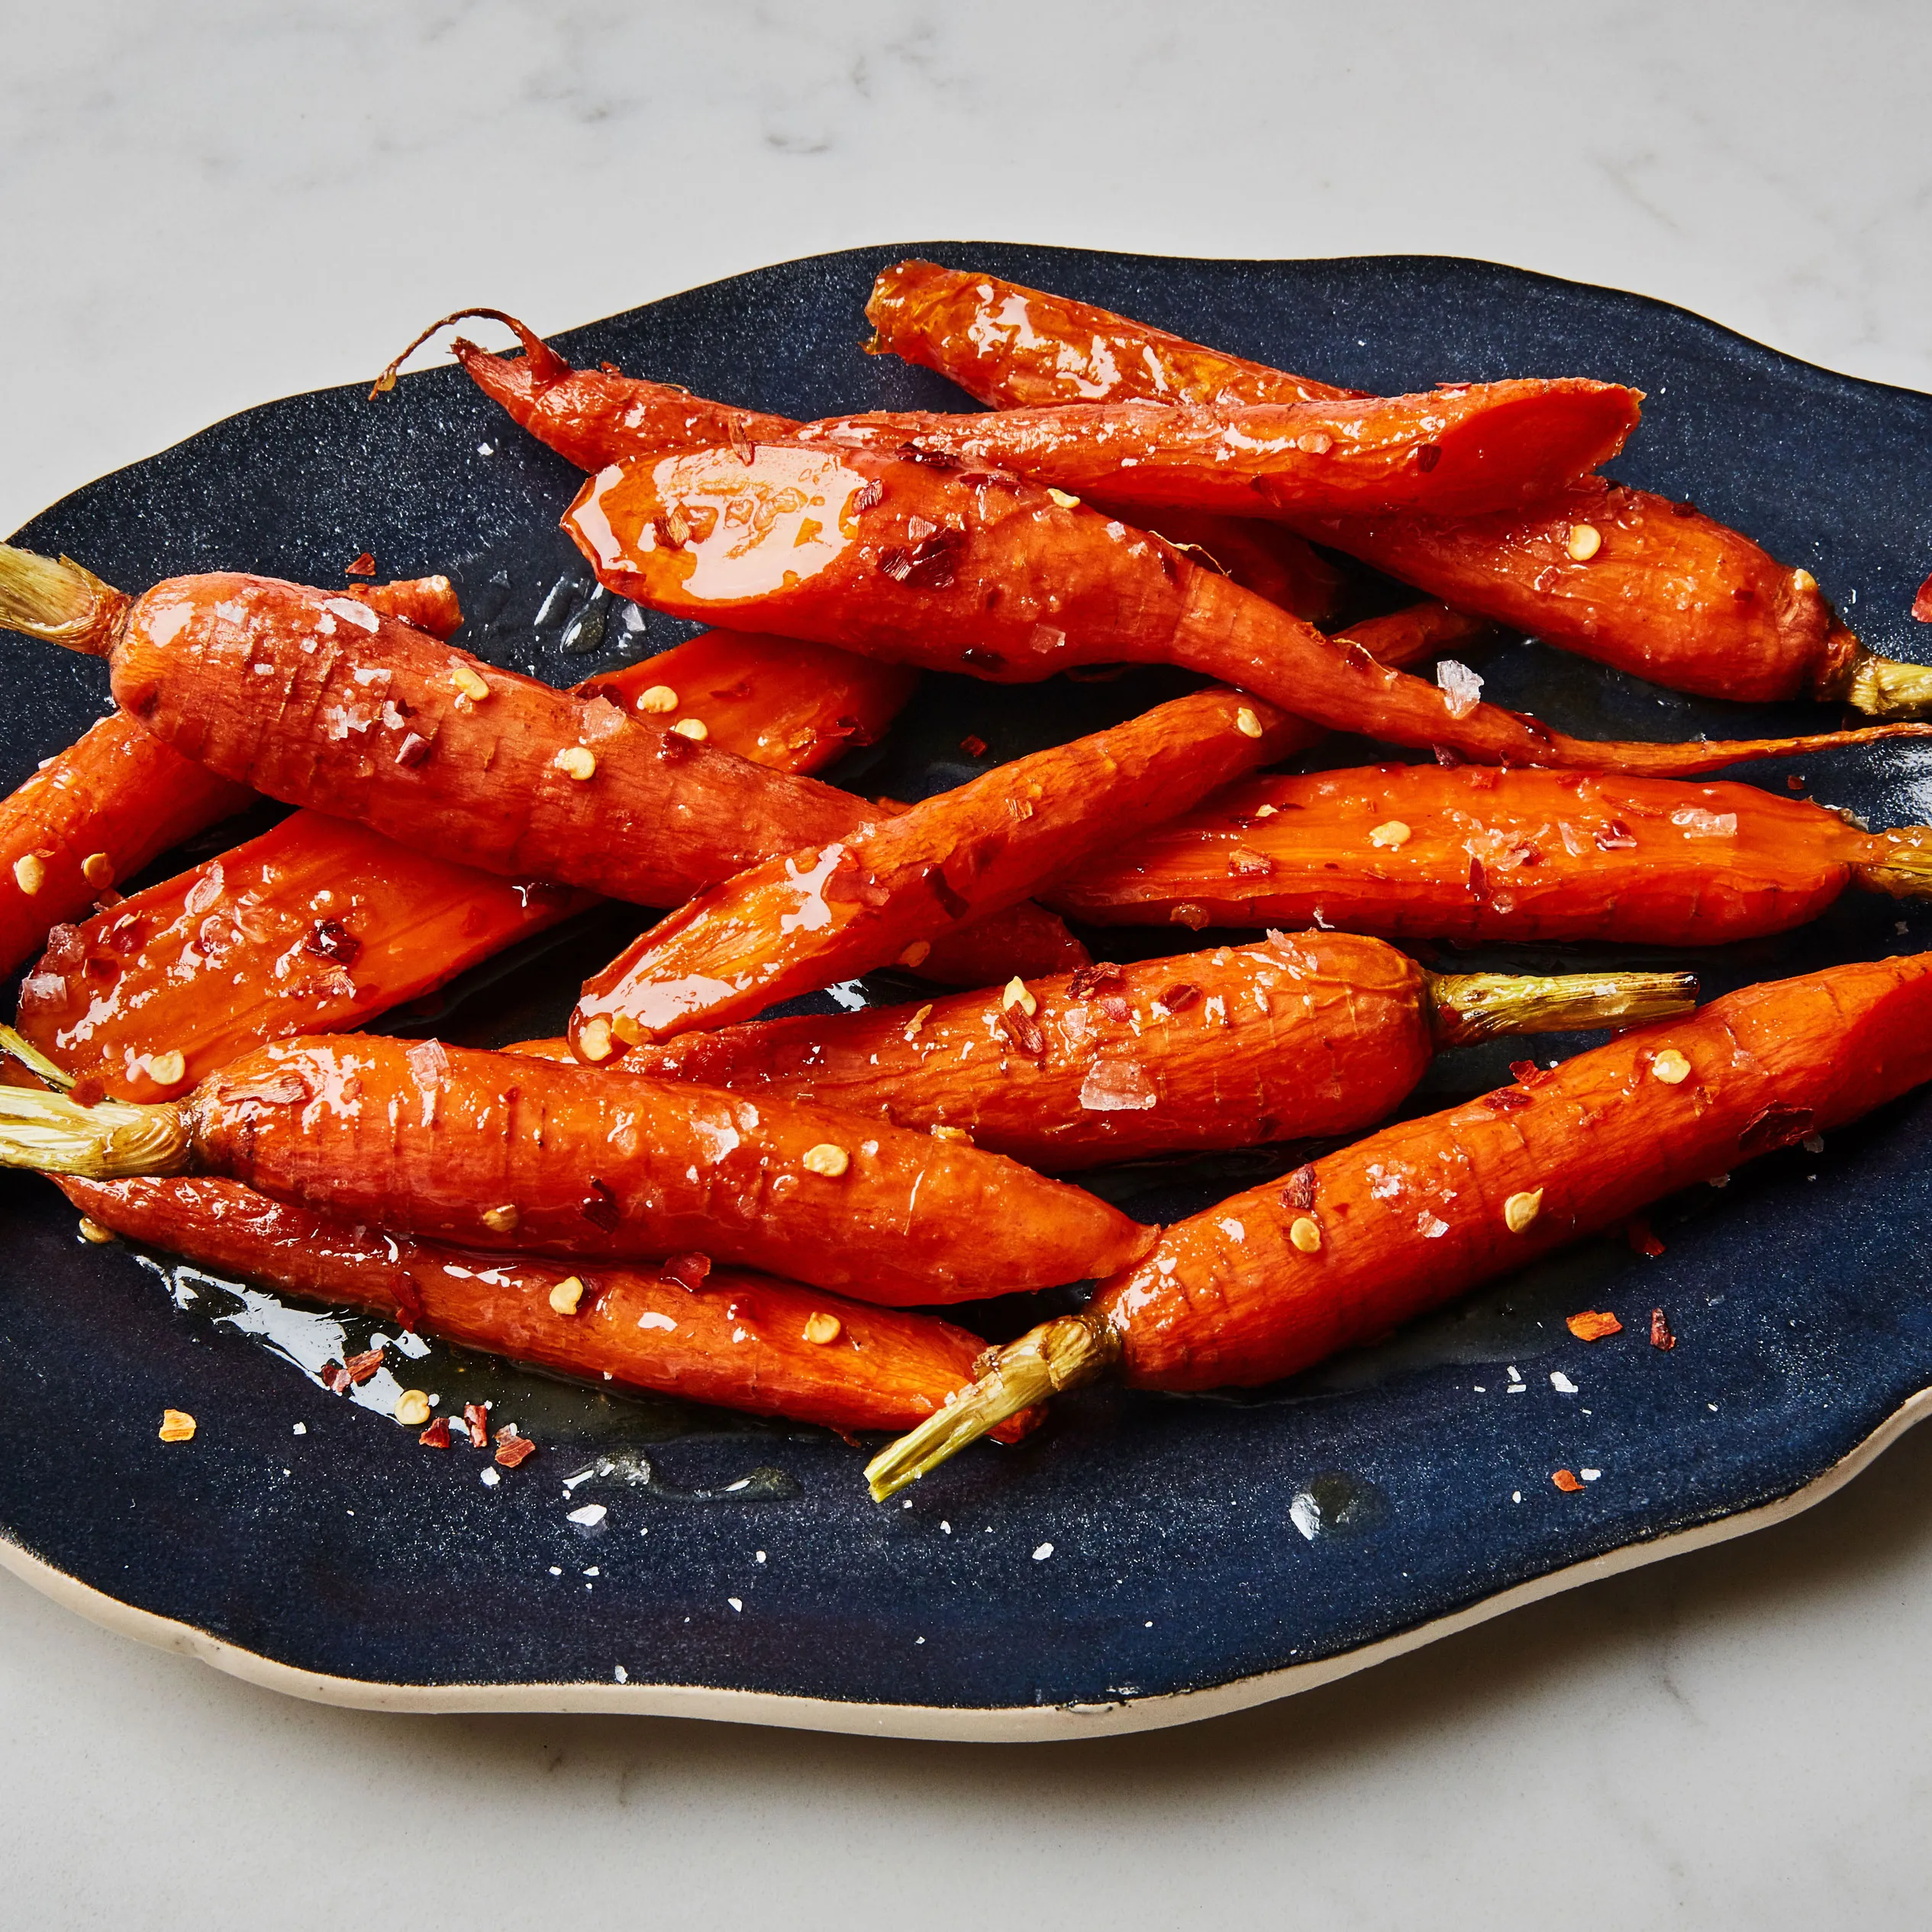 2. Carrots Glazed with Maple and Smoked Seasoning